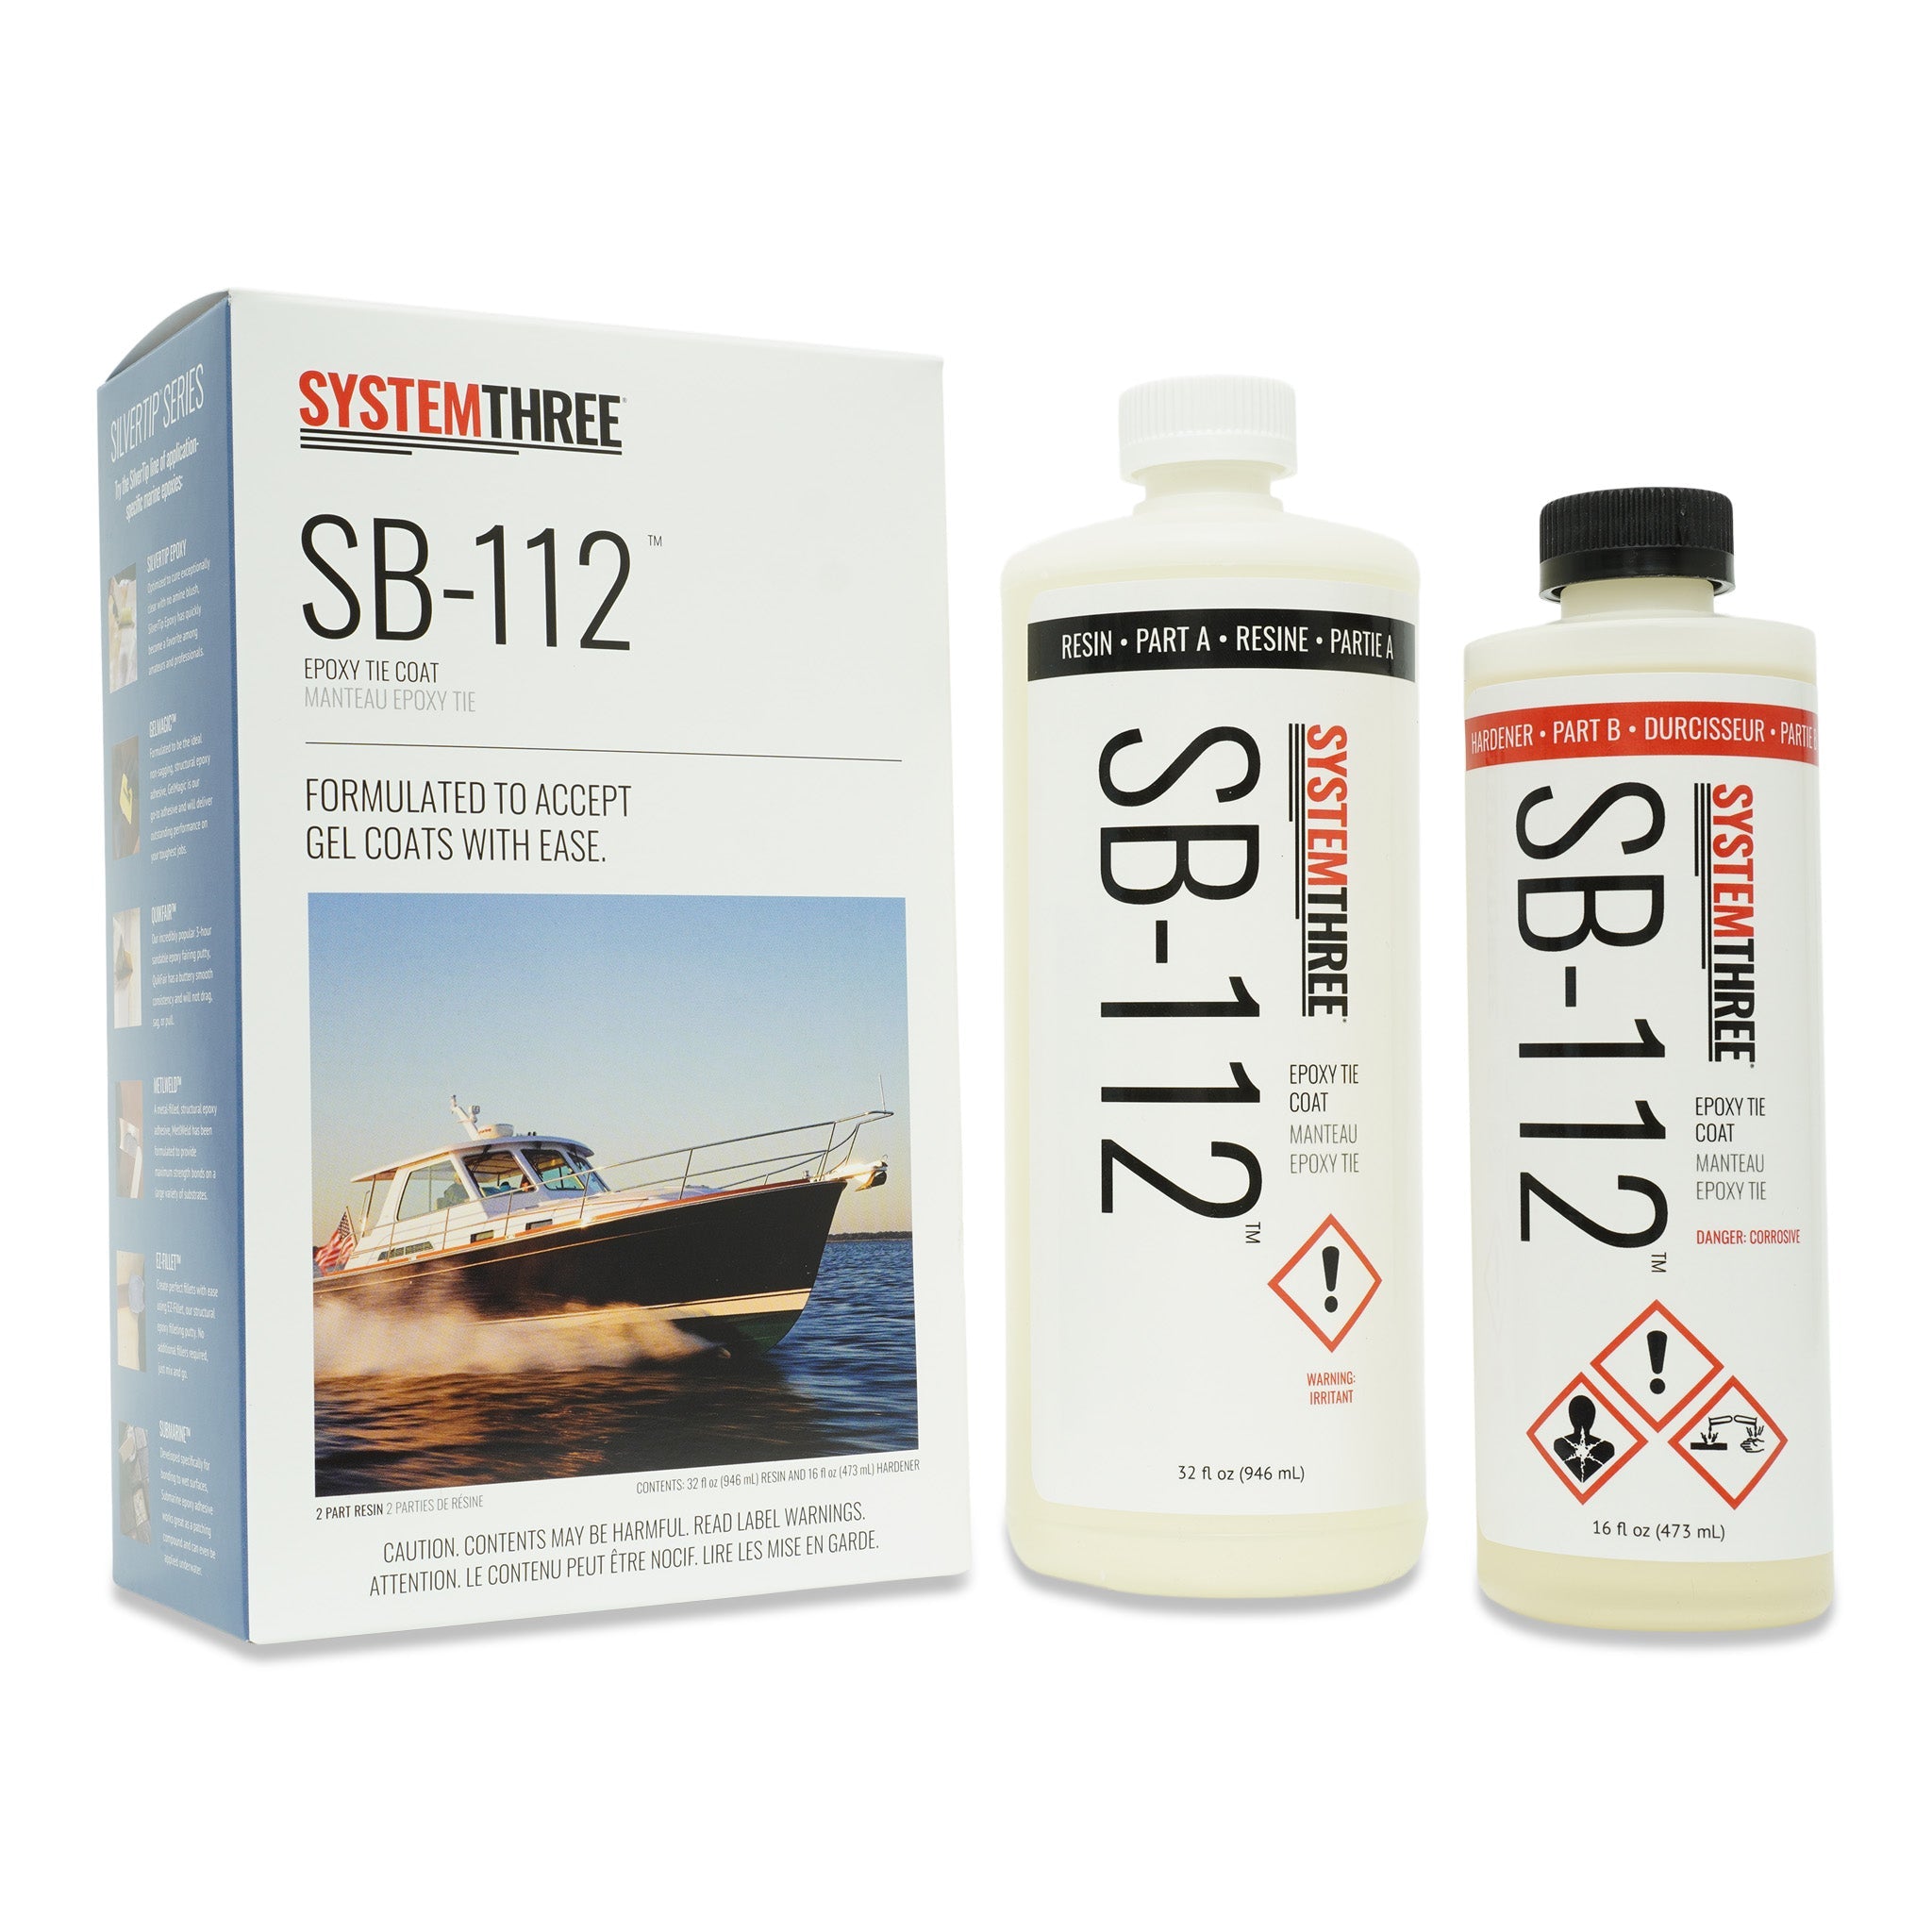 Polyester Resin: Why It's Popular for Boat Repairs